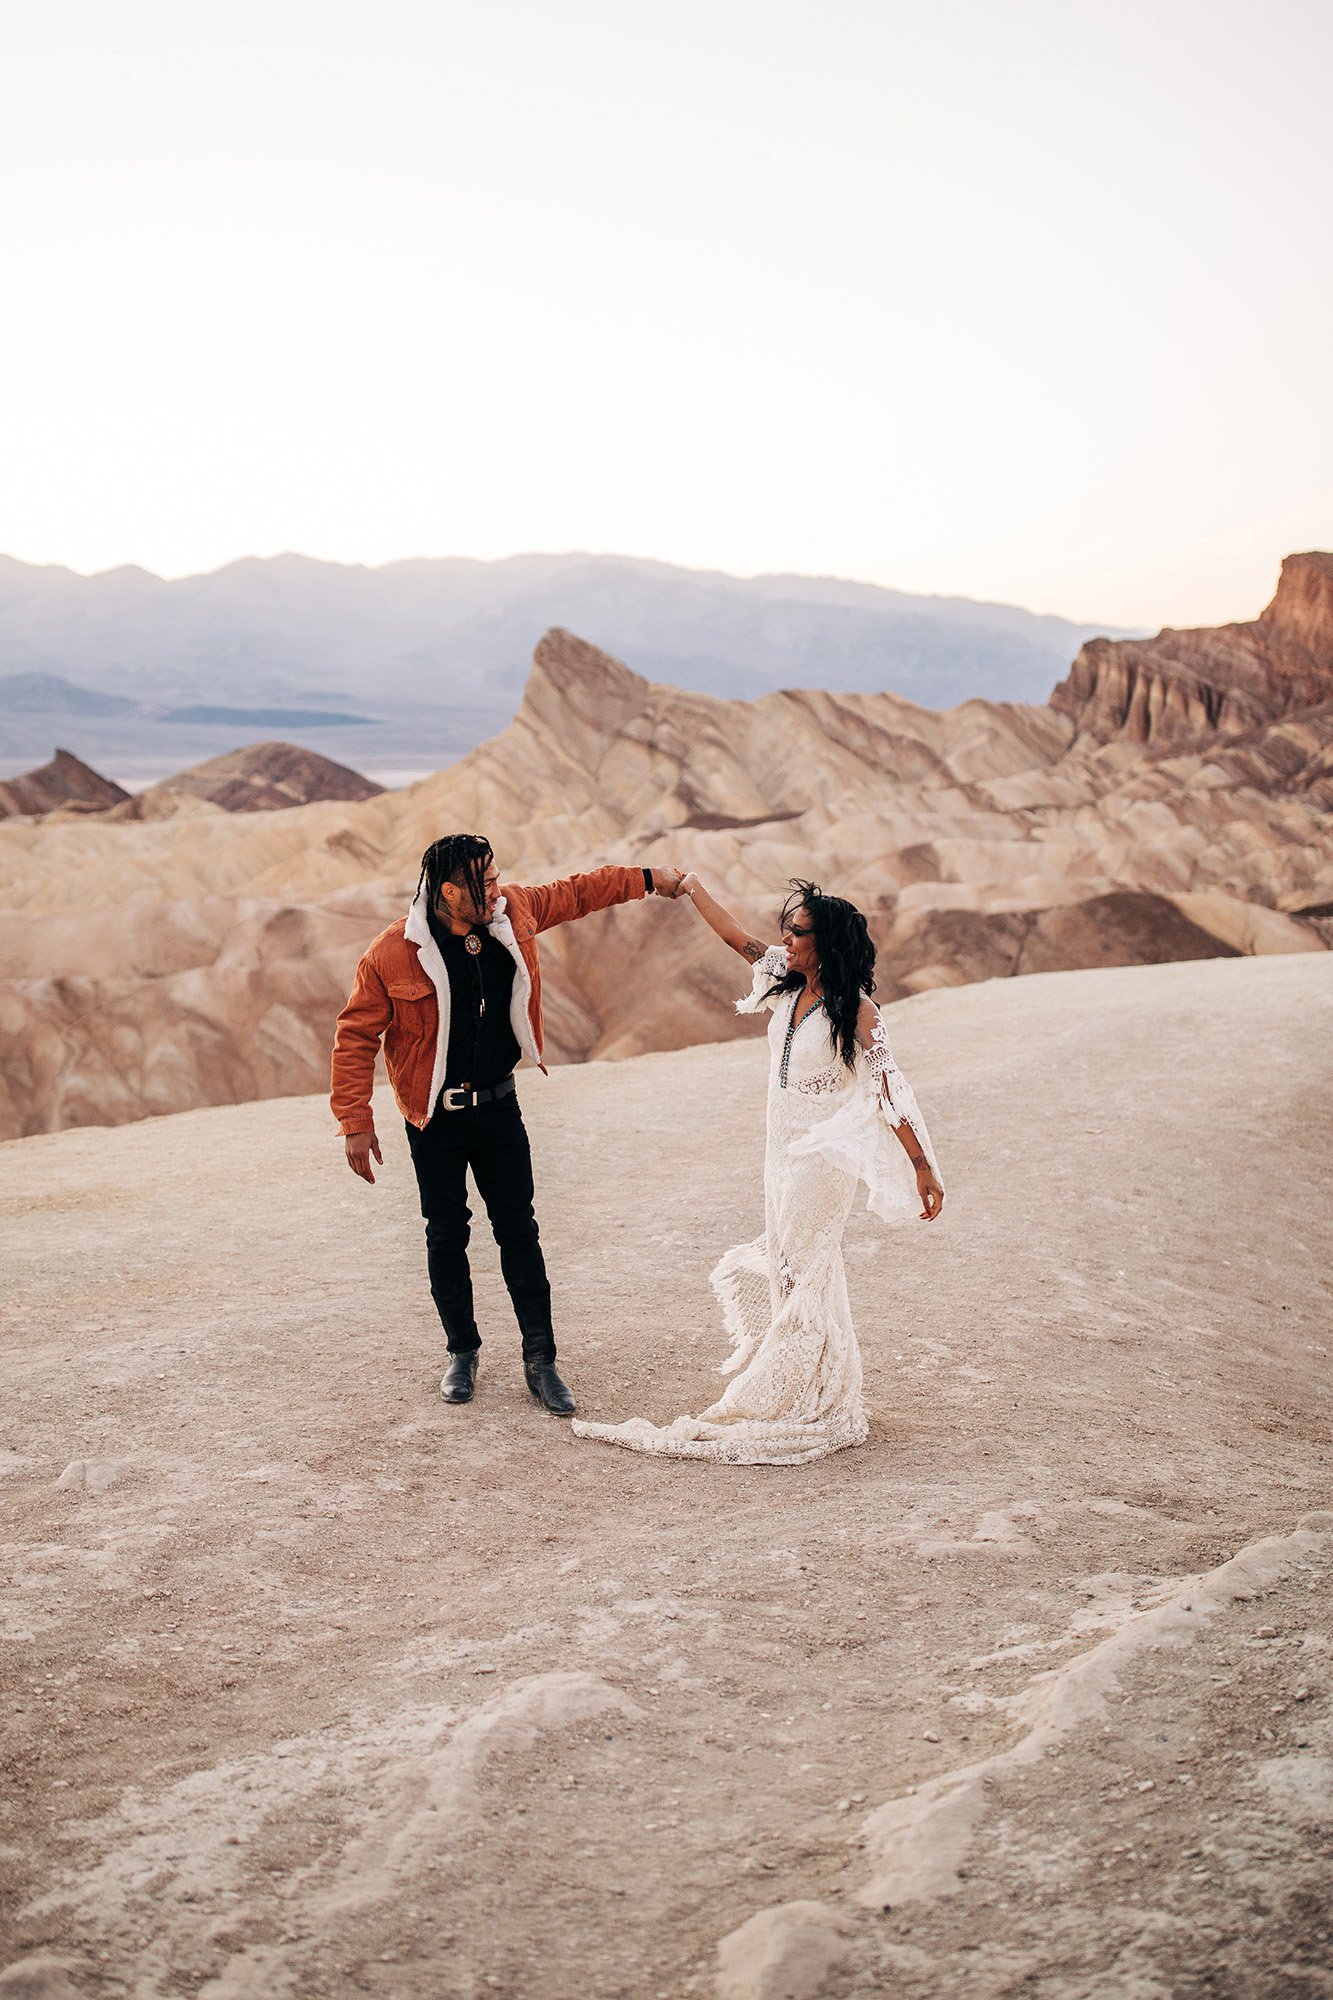 Mieko and Kevin dance in front of an iconic view in Death Valley National Park.